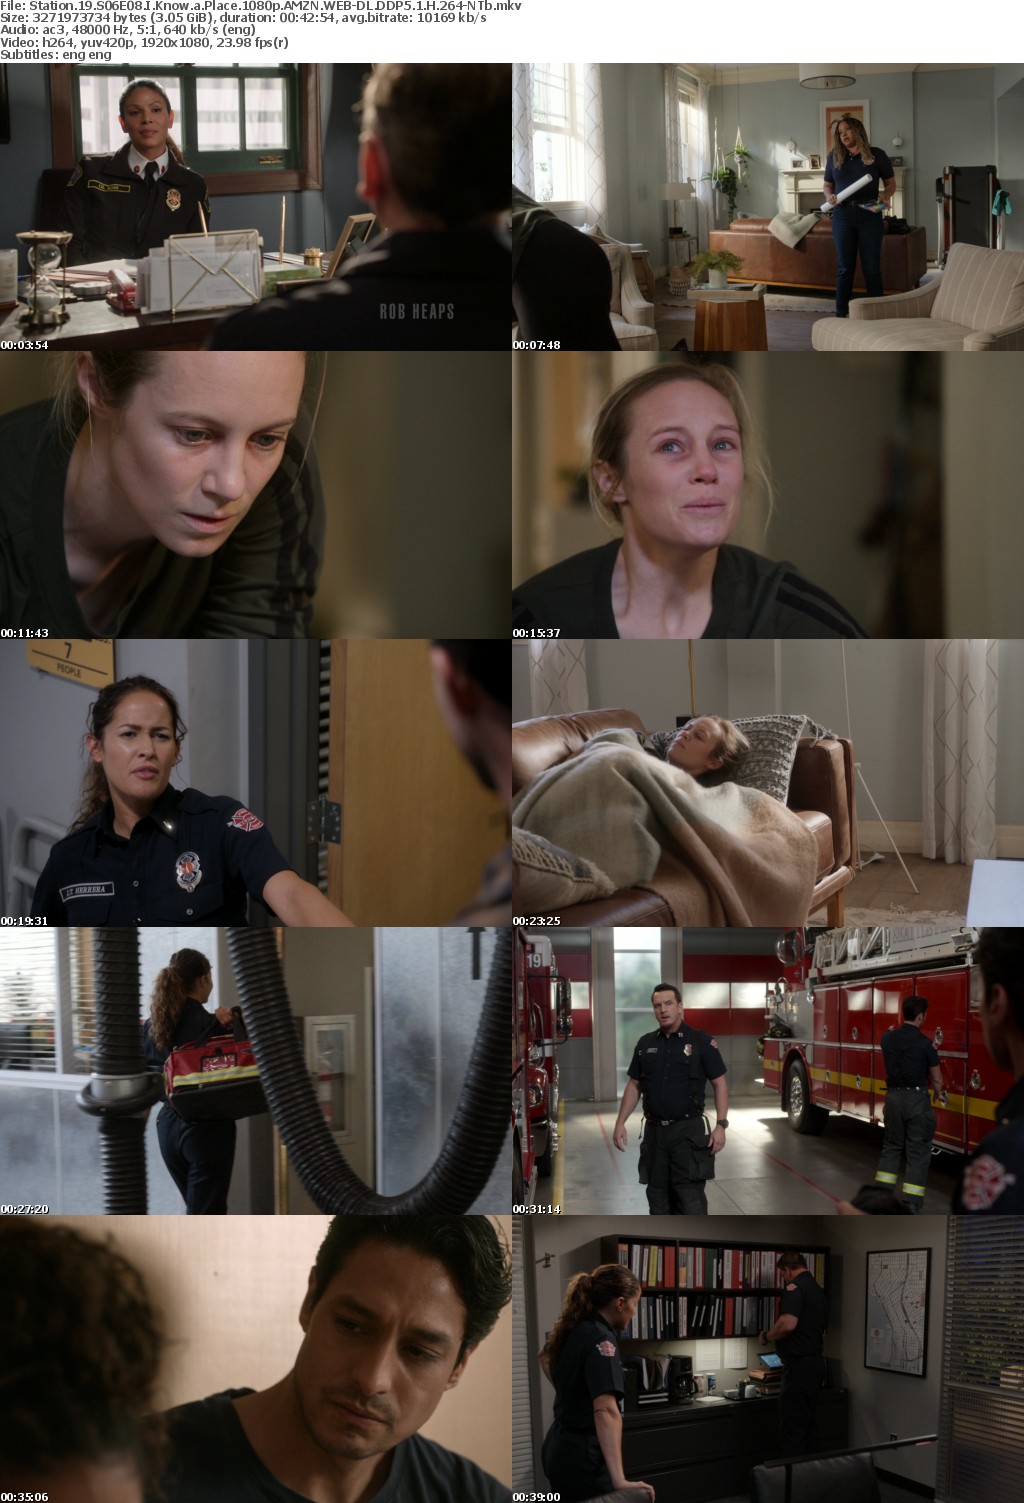 Station 19 S06E08 I Know a Place 1080p AMZN WEBRip DDP5 1 x264-NTb